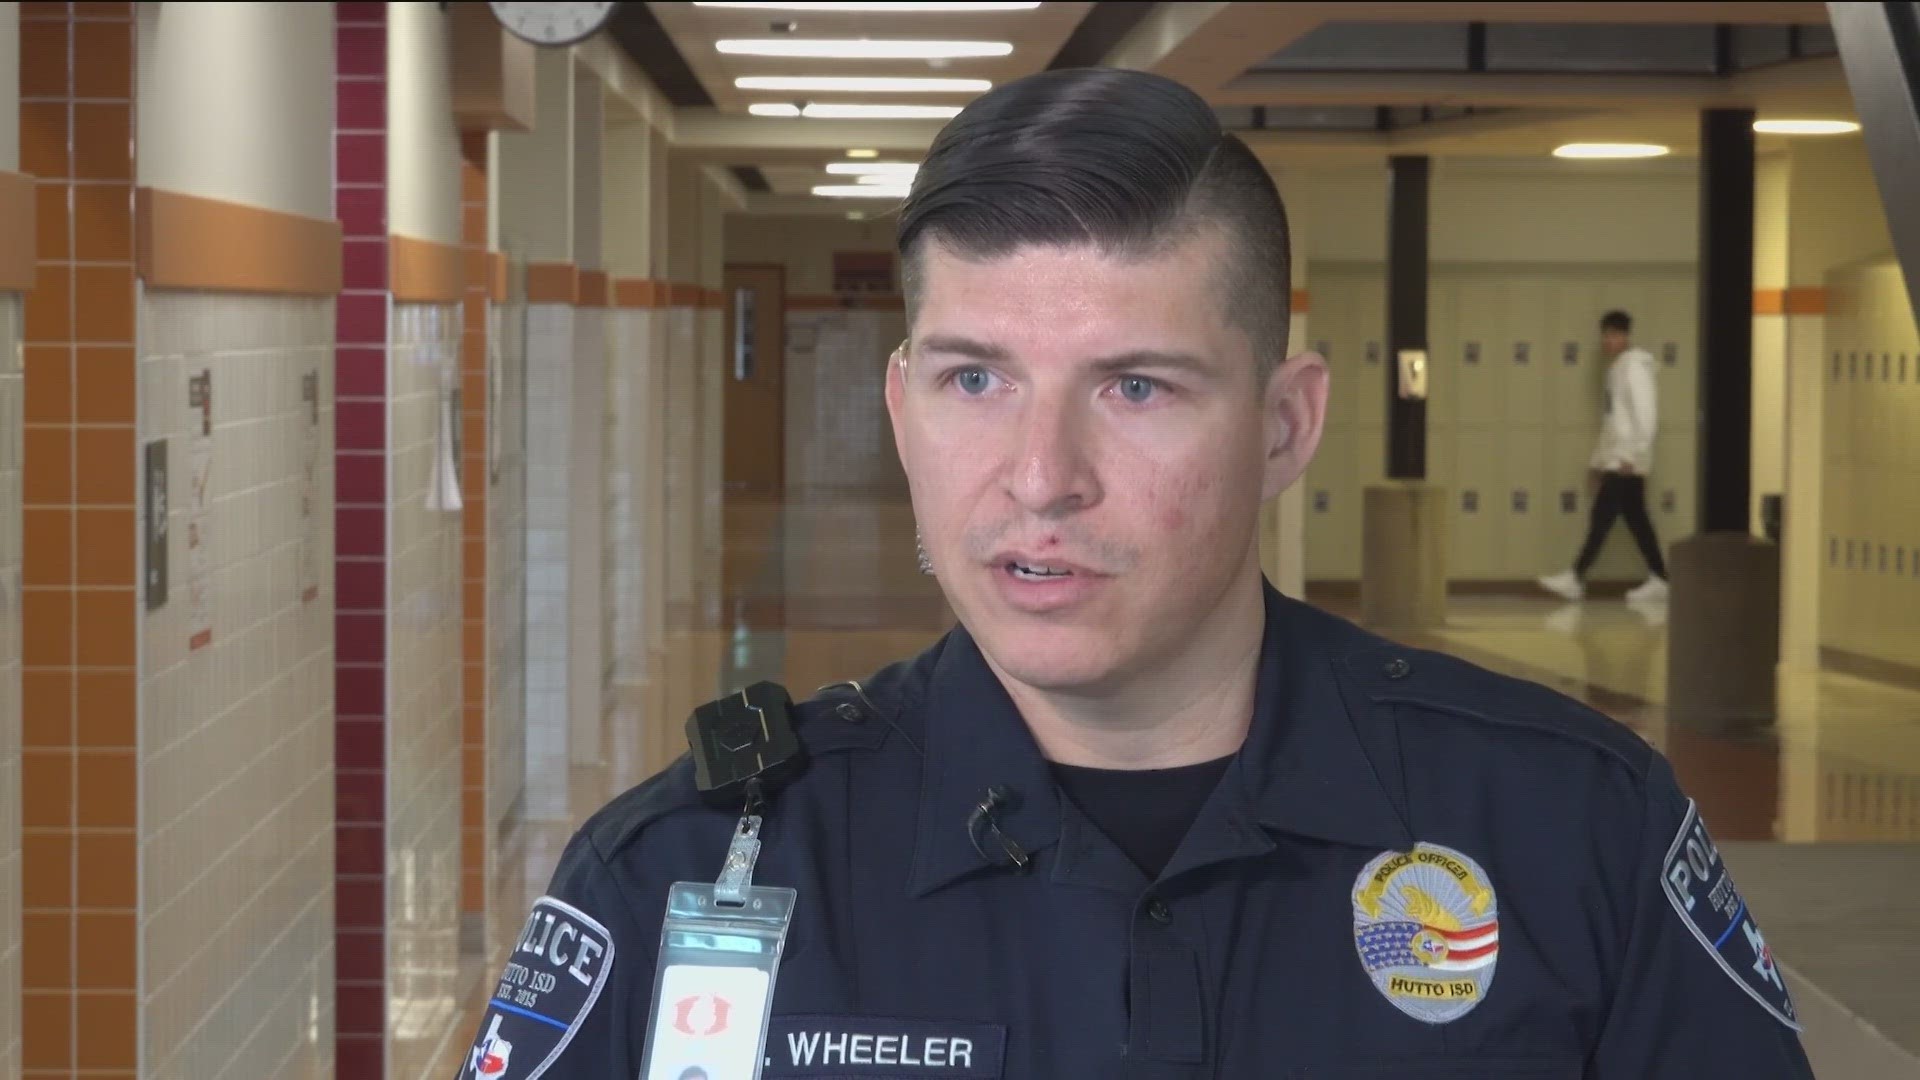 Hutto ISD has opened a police academy to comply with a new Texas law requiring armed security at every school in the state. KVUE's Isabella Basco reports.